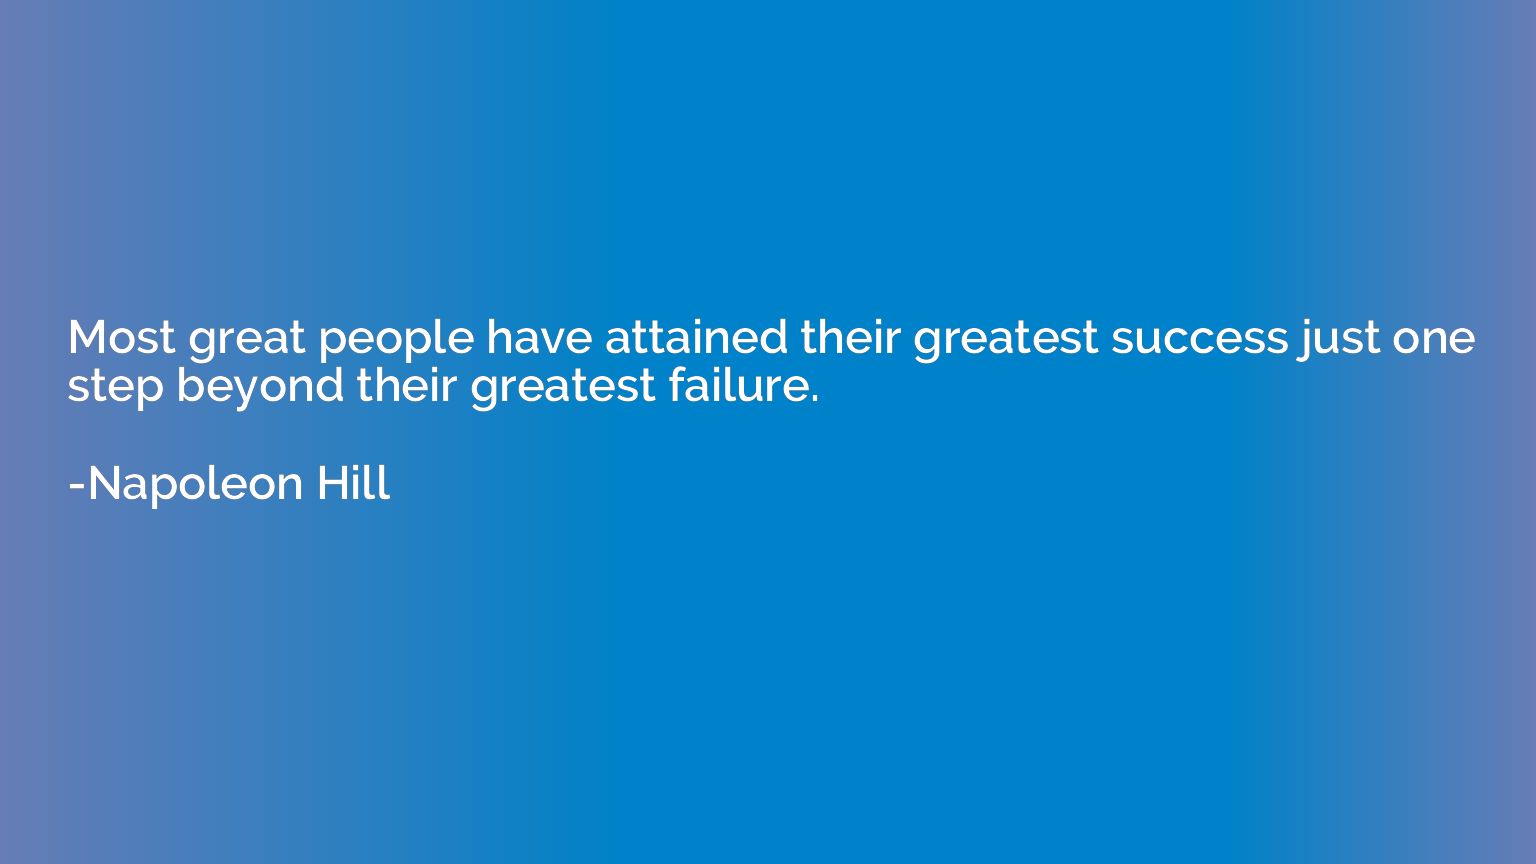 Most great people have attained their greatest success just 